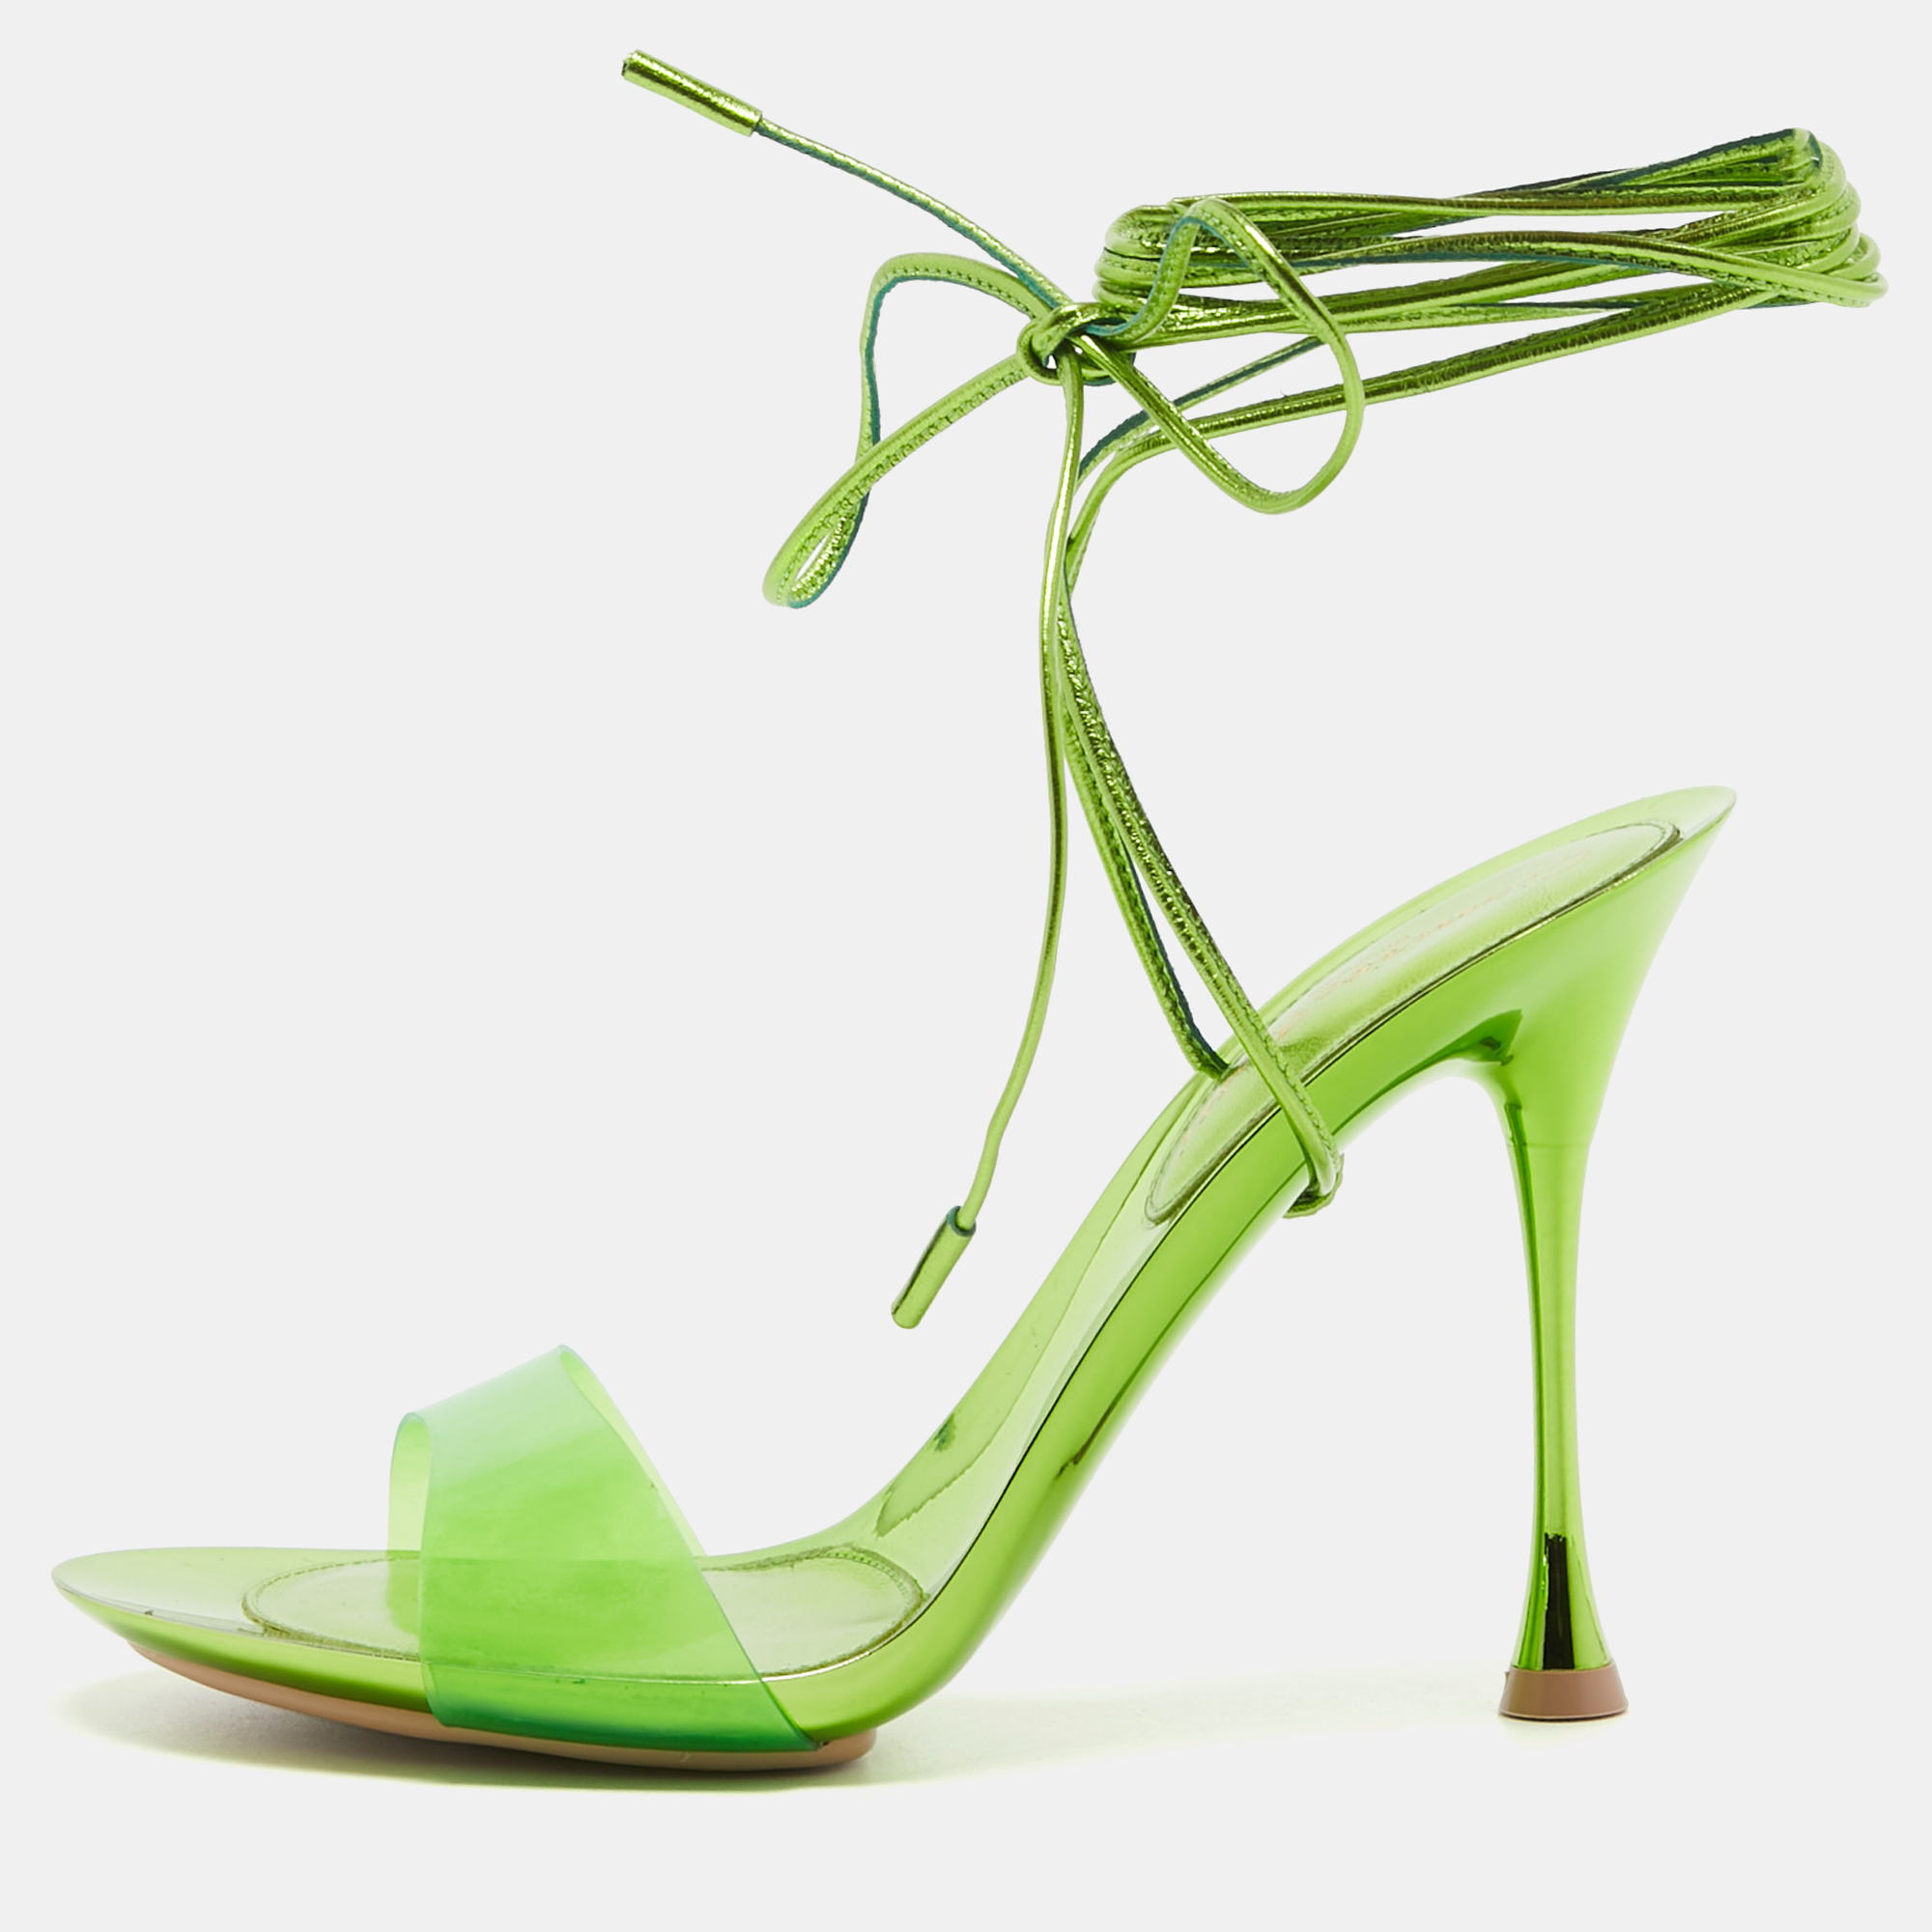 Gianvito rossi green pvc and leather spice ankle tie sandals size 37